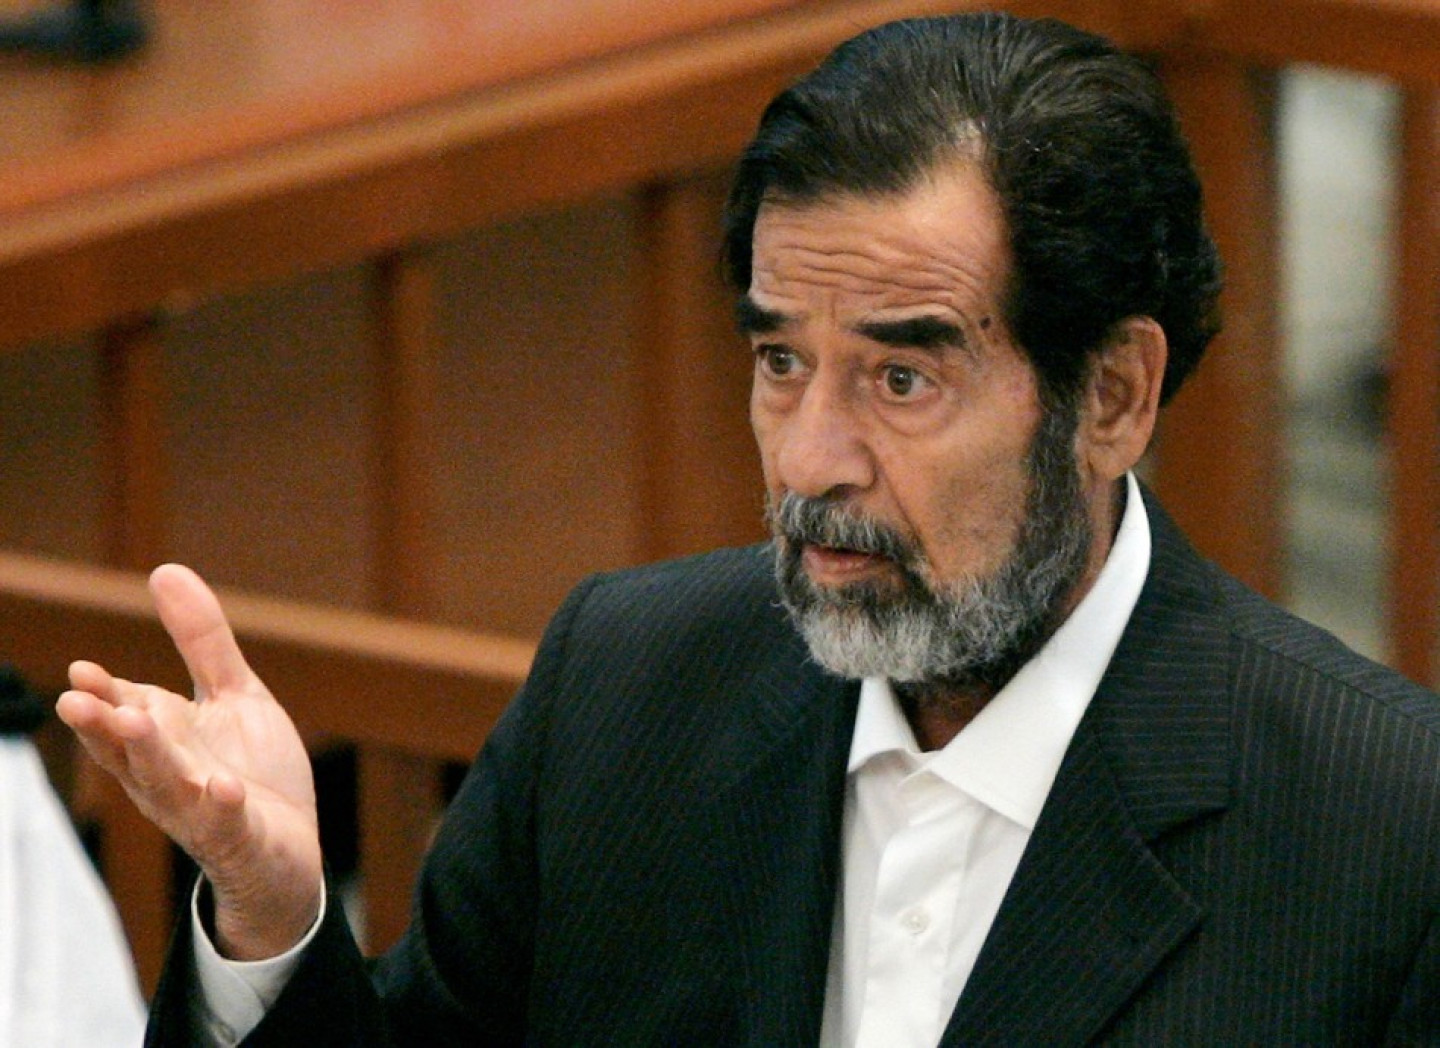 Former Iraqi leader Saddam addresses the court on the third day of his trial in Baghdad